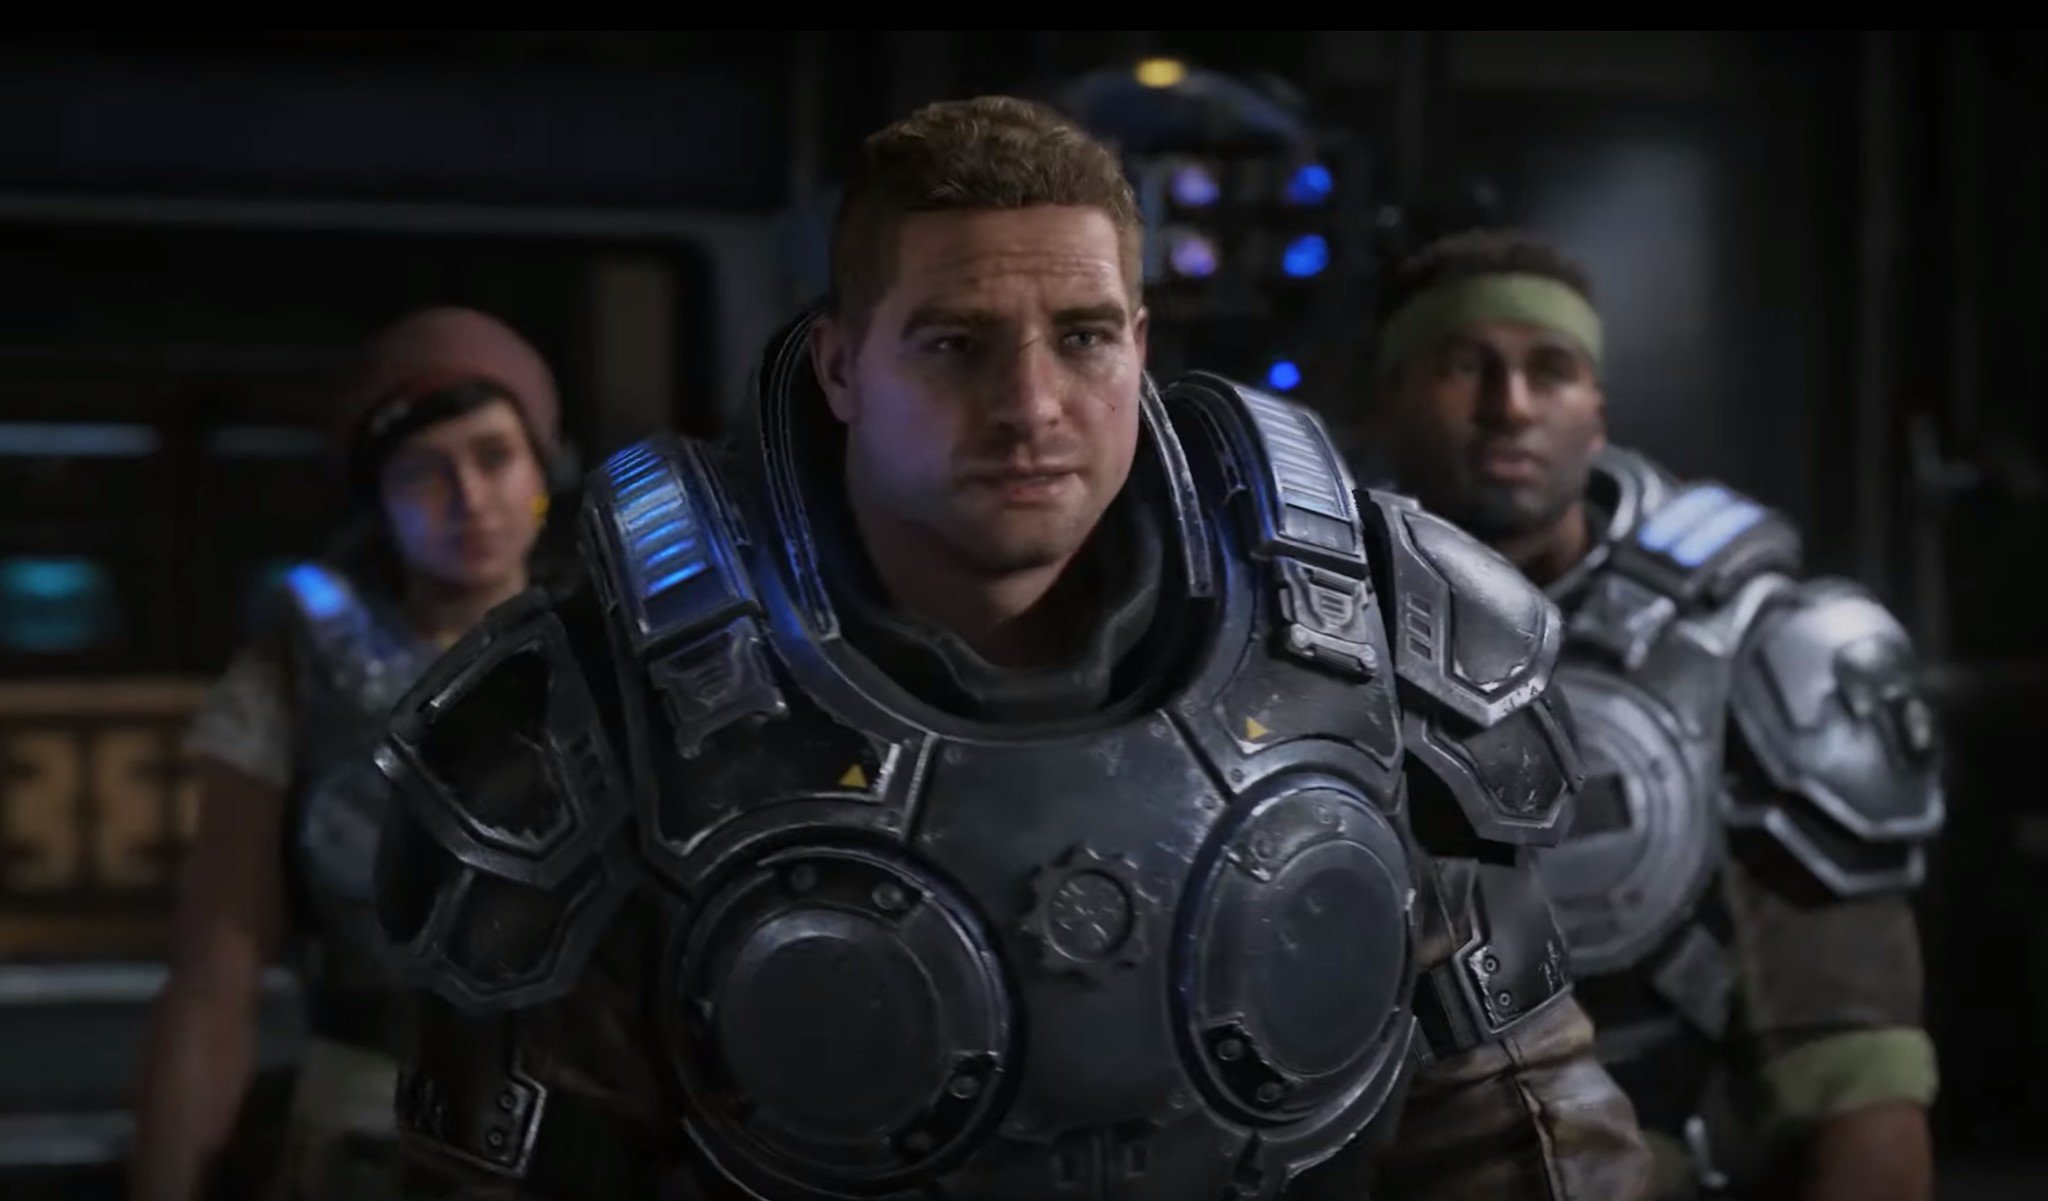 Gears Of War 5 - Official Cinematic Announcement Trailer